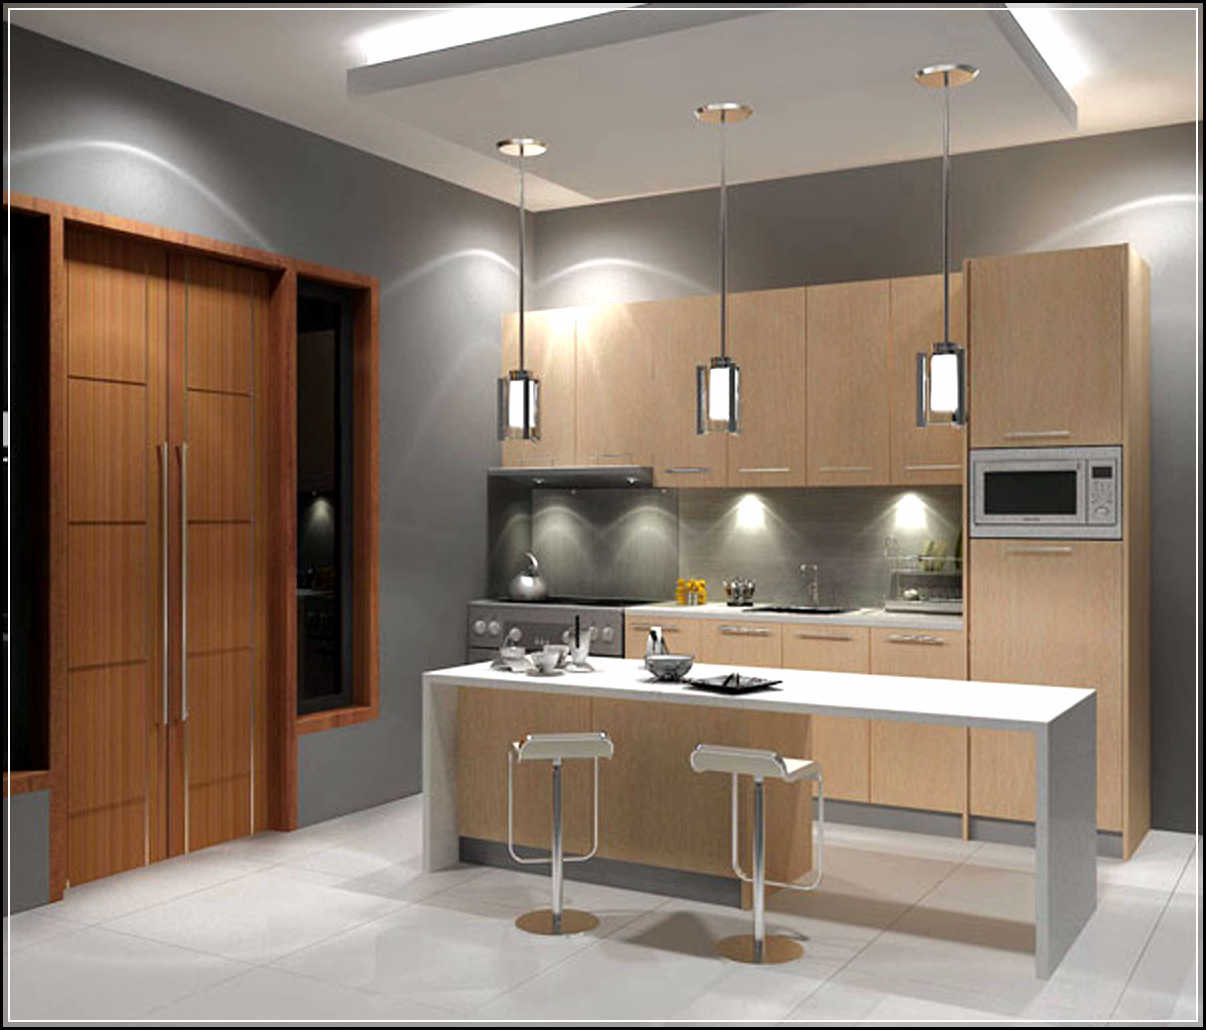 Small Modern Kitchen Ideas
 Fill the Gap in the Small Modern Kitchen Designs